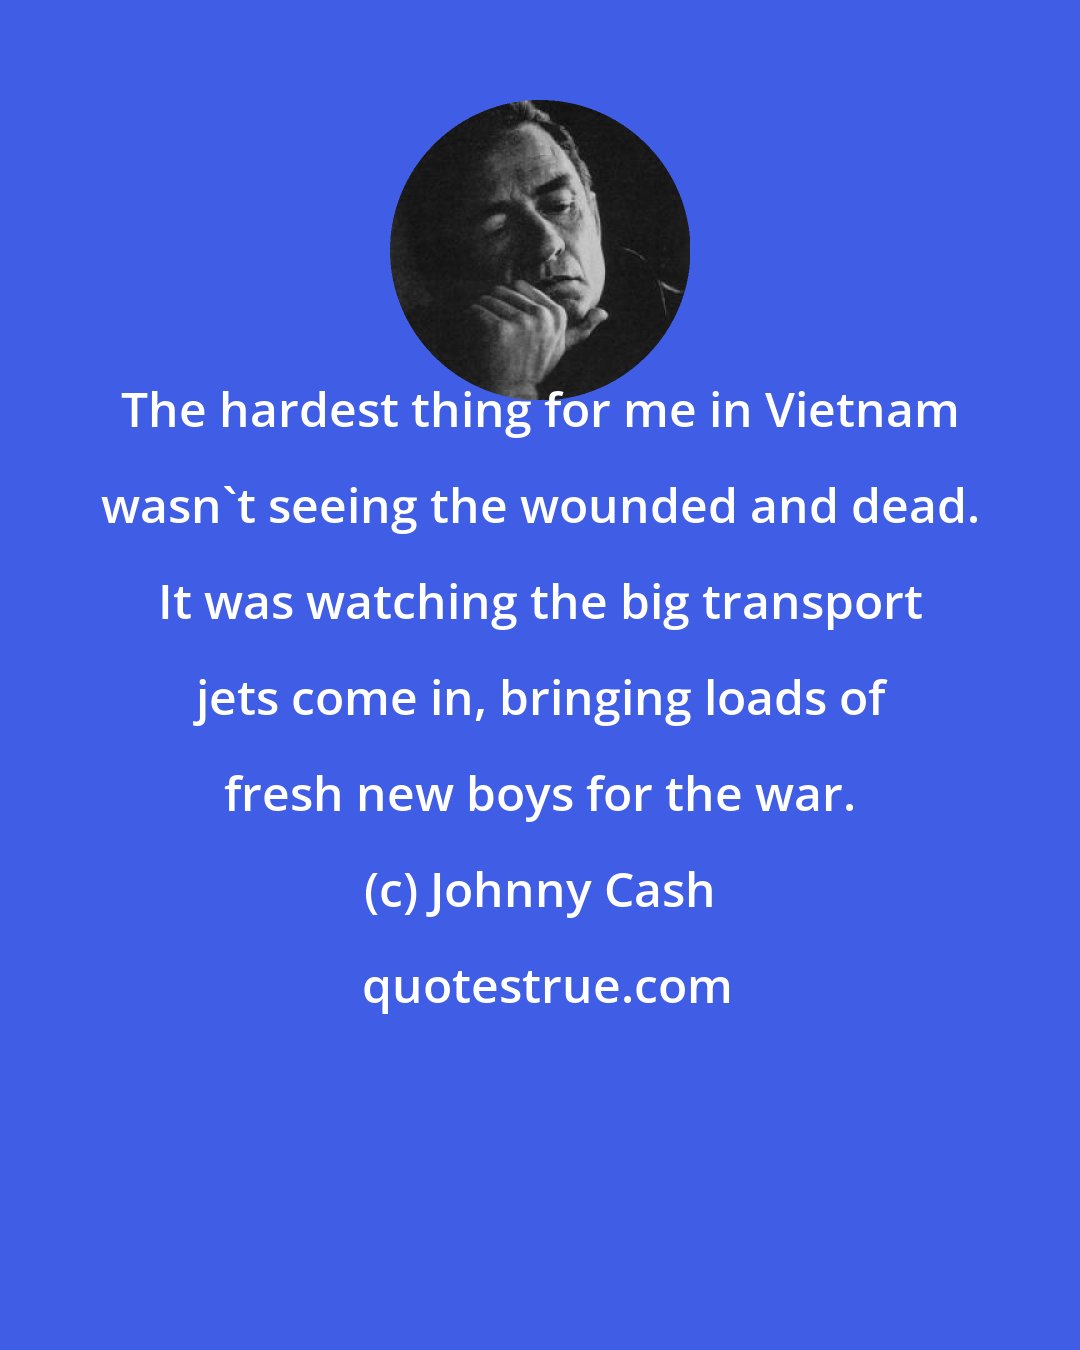 Johnny Cash: The hardest thing for me in Vietnam wasn't seeing the wounded and dead. It was watching the big transport jets come in, bringing loads of fresh new boys for the war.